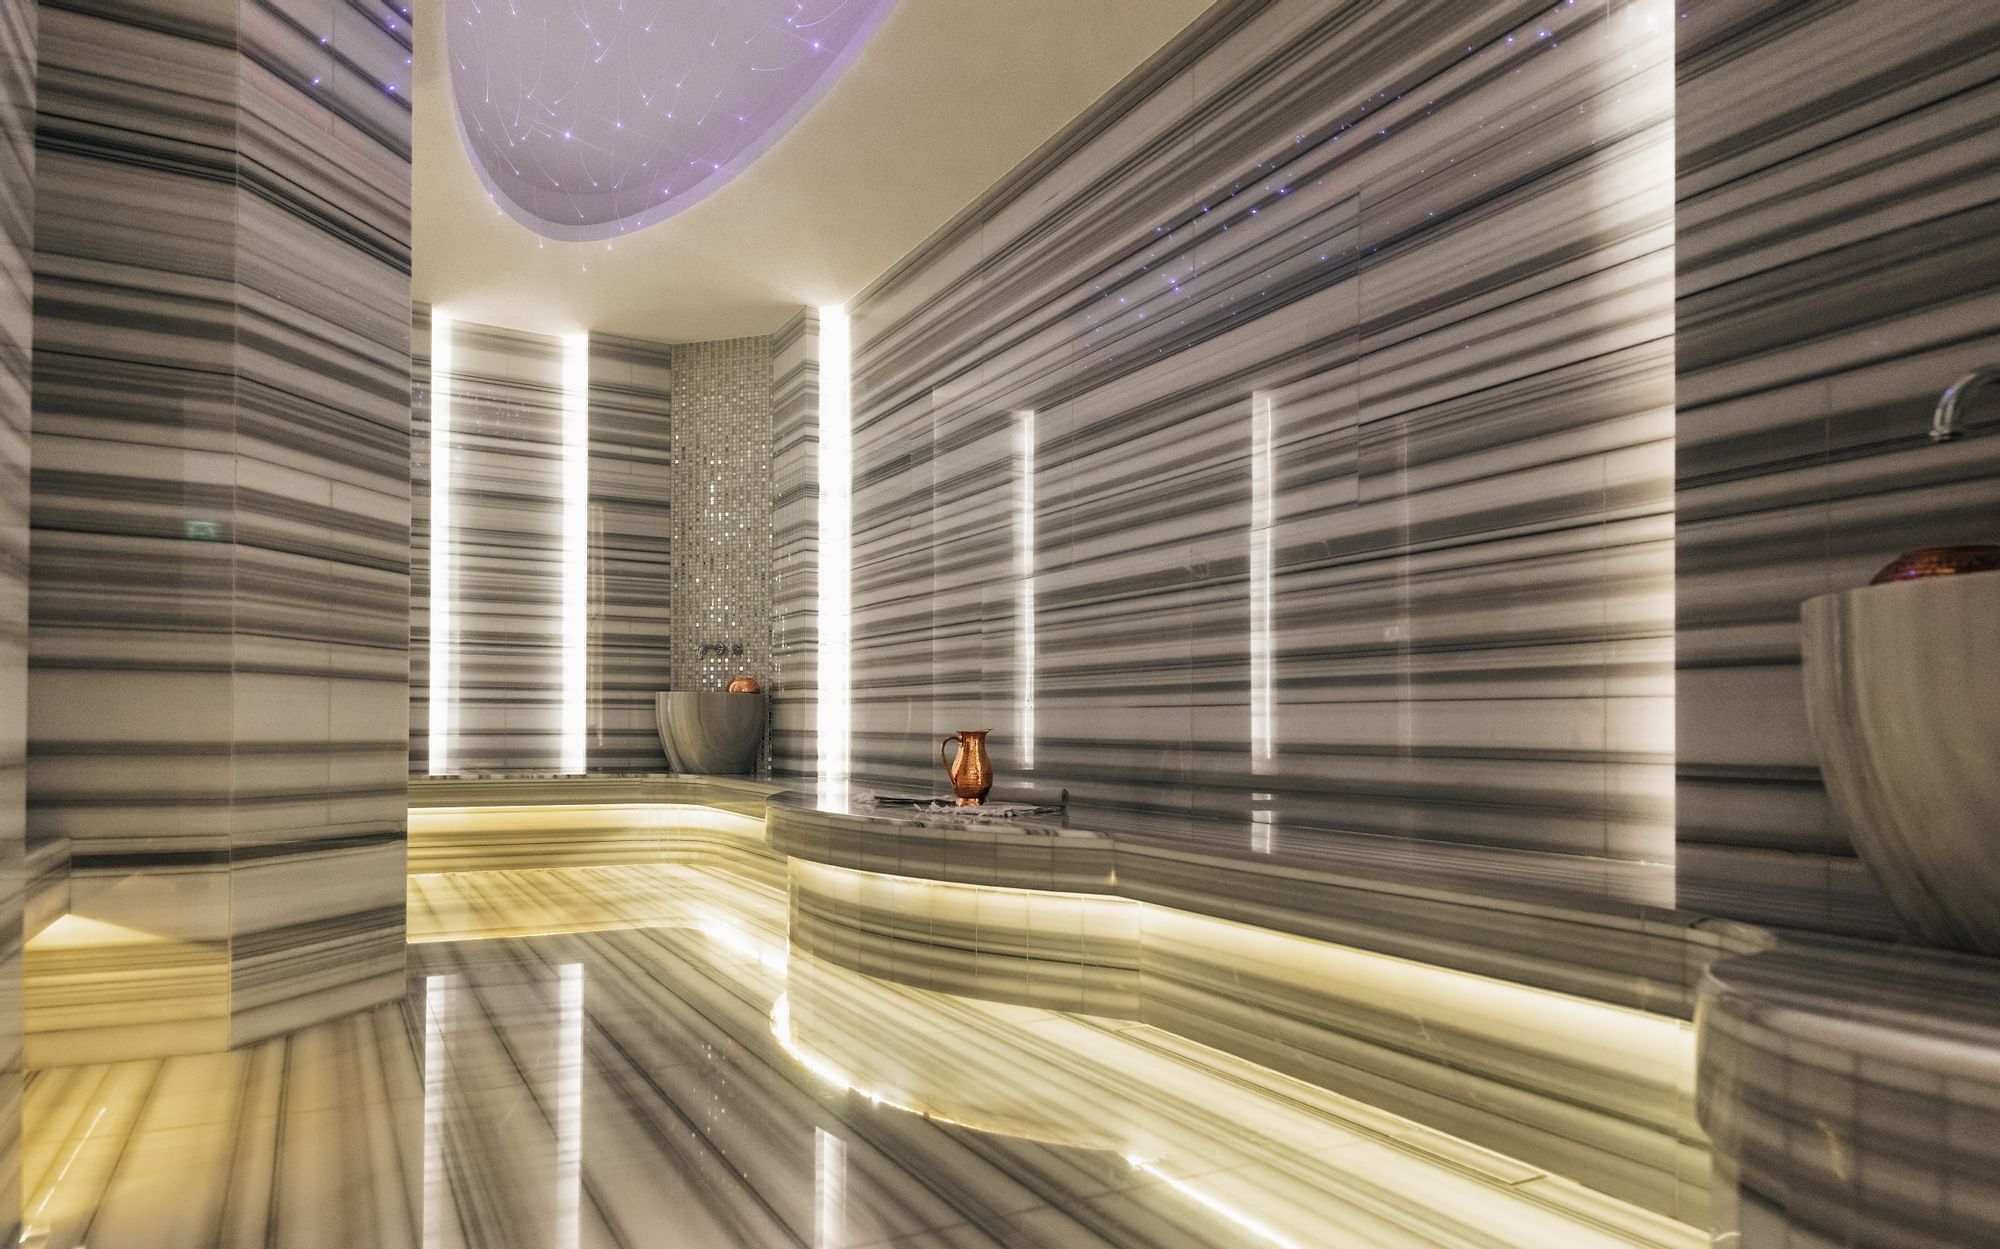 Relaxation area in Pause Spa with marble walls at Paramount Hotel Dubai